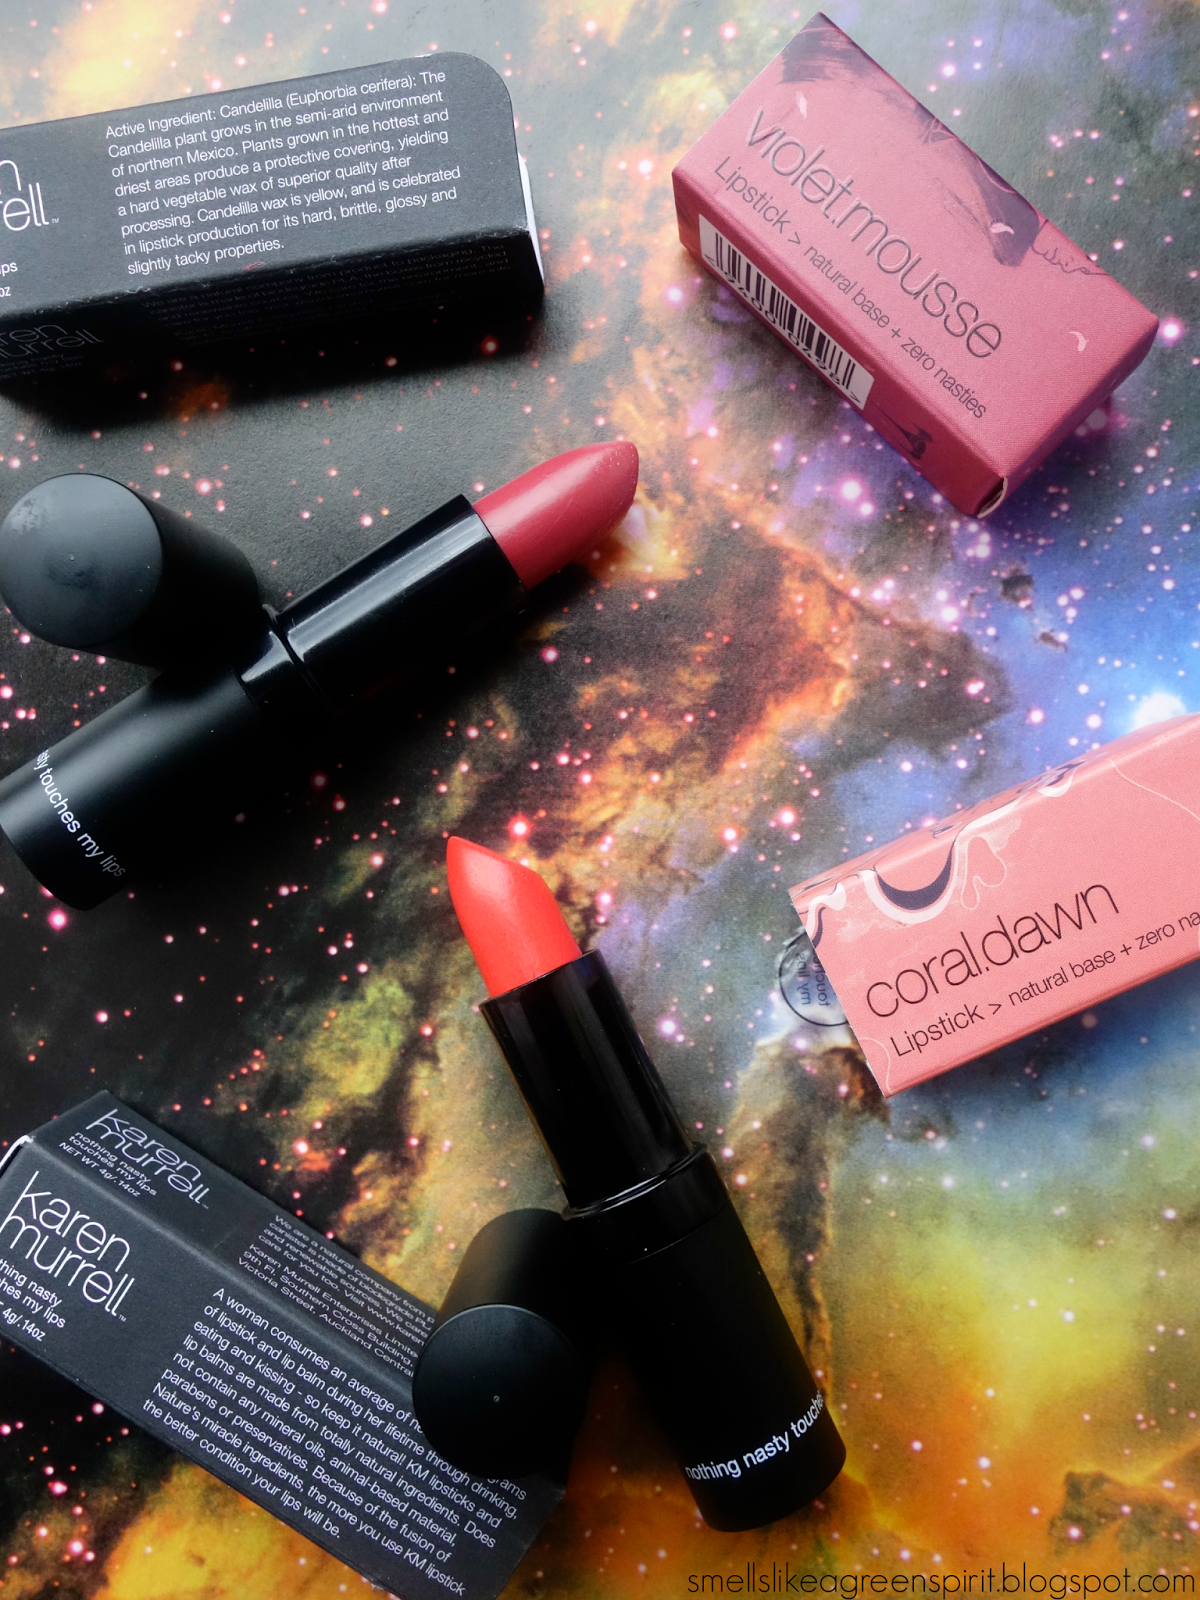 + a lipstick review Mousse smells | Coral day…Karen Murrell & like Violet spirit swatches a A Dawn green